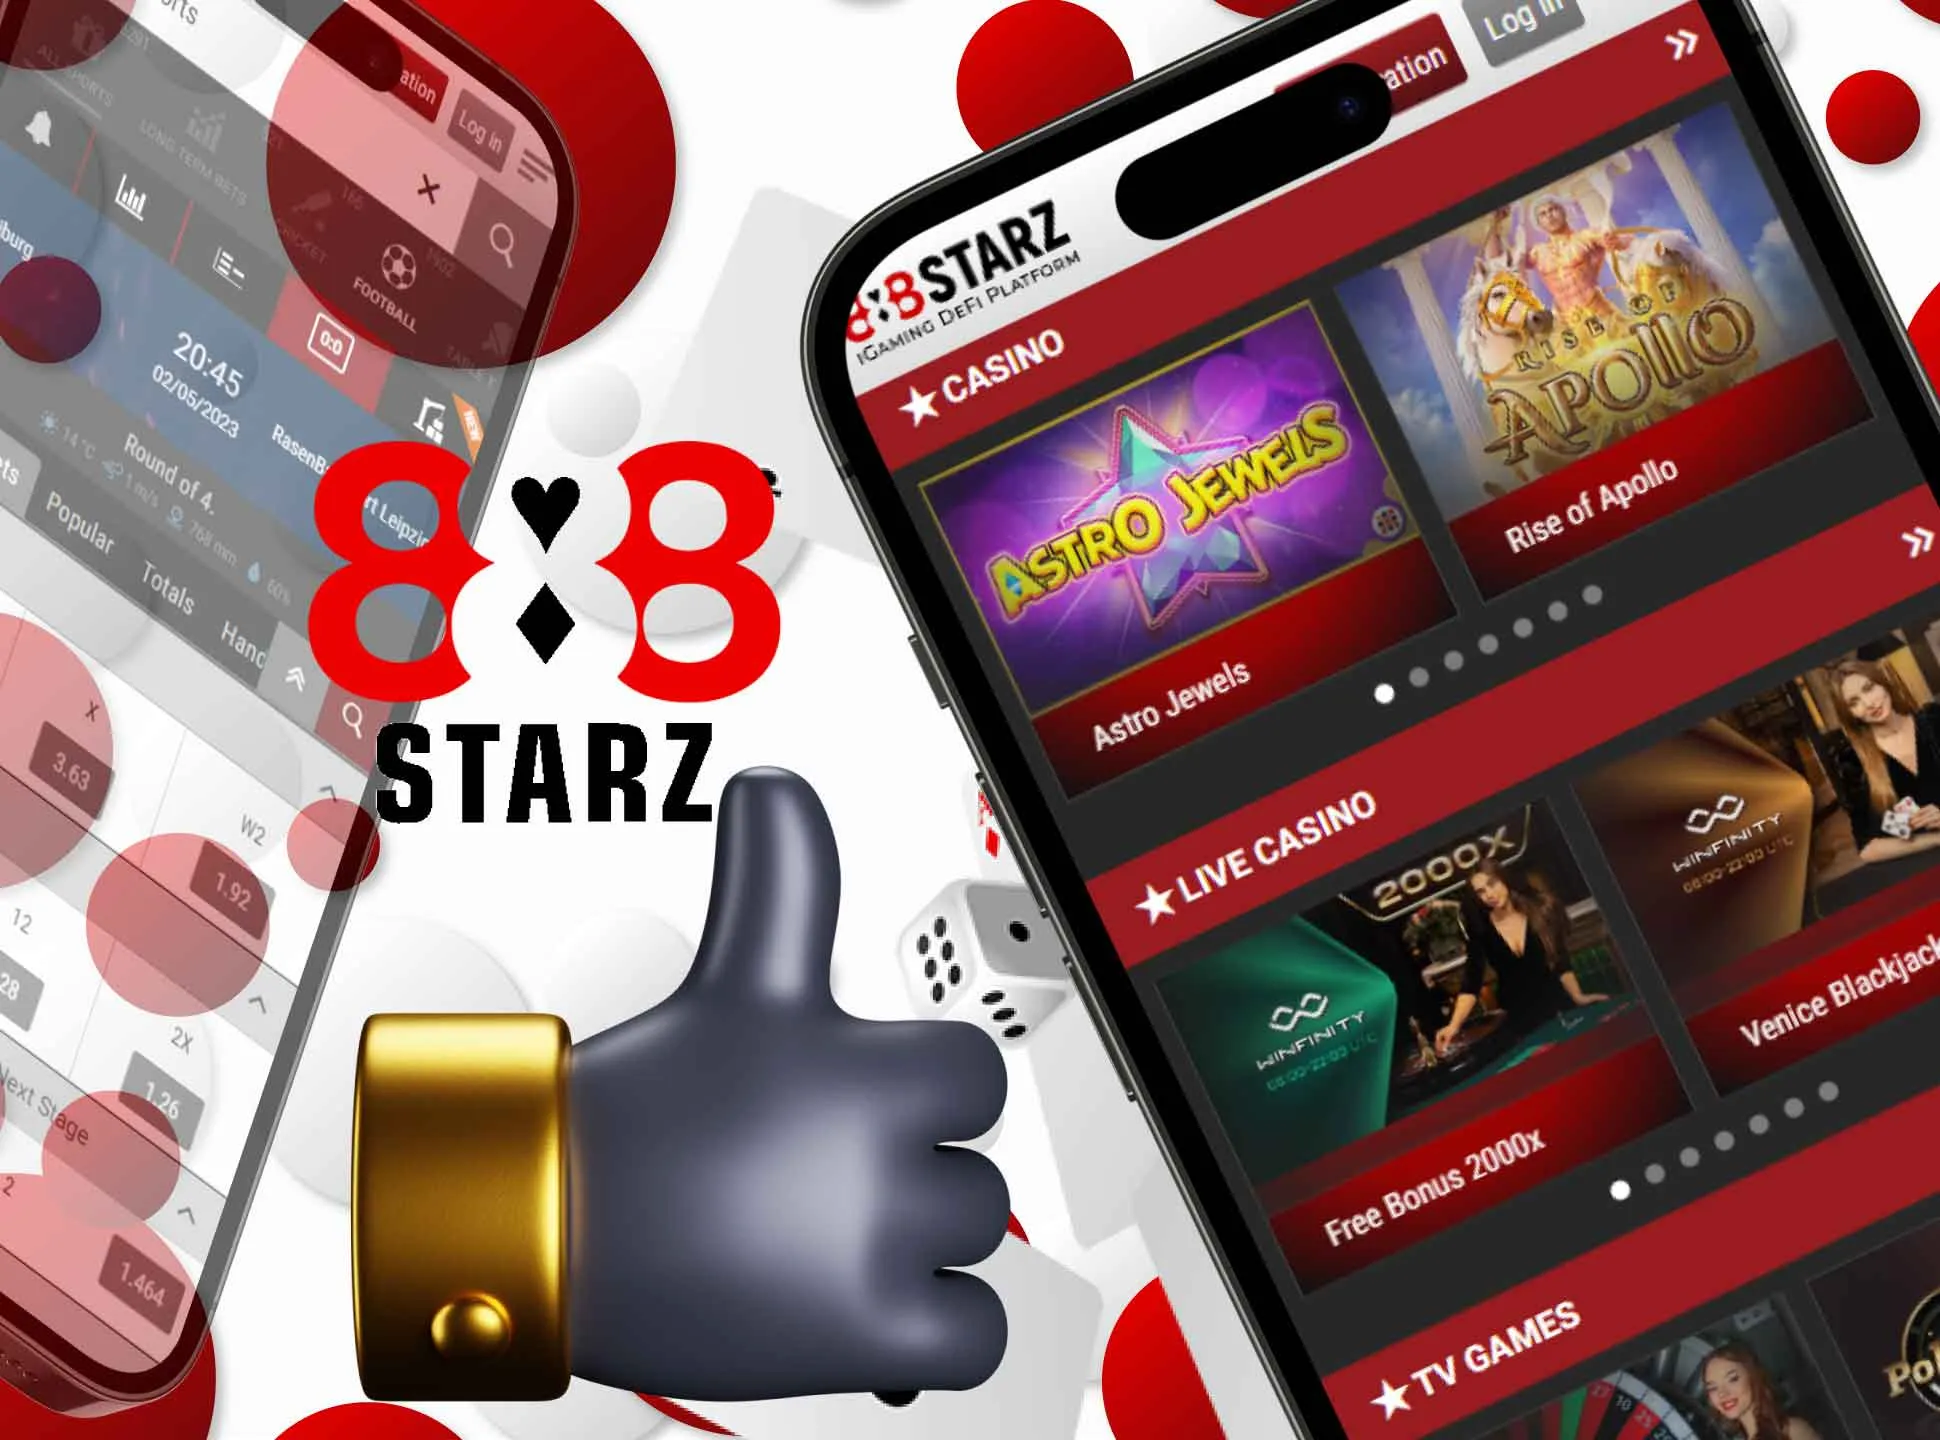 Download the 888starz mobile app and place bets whenever you want.